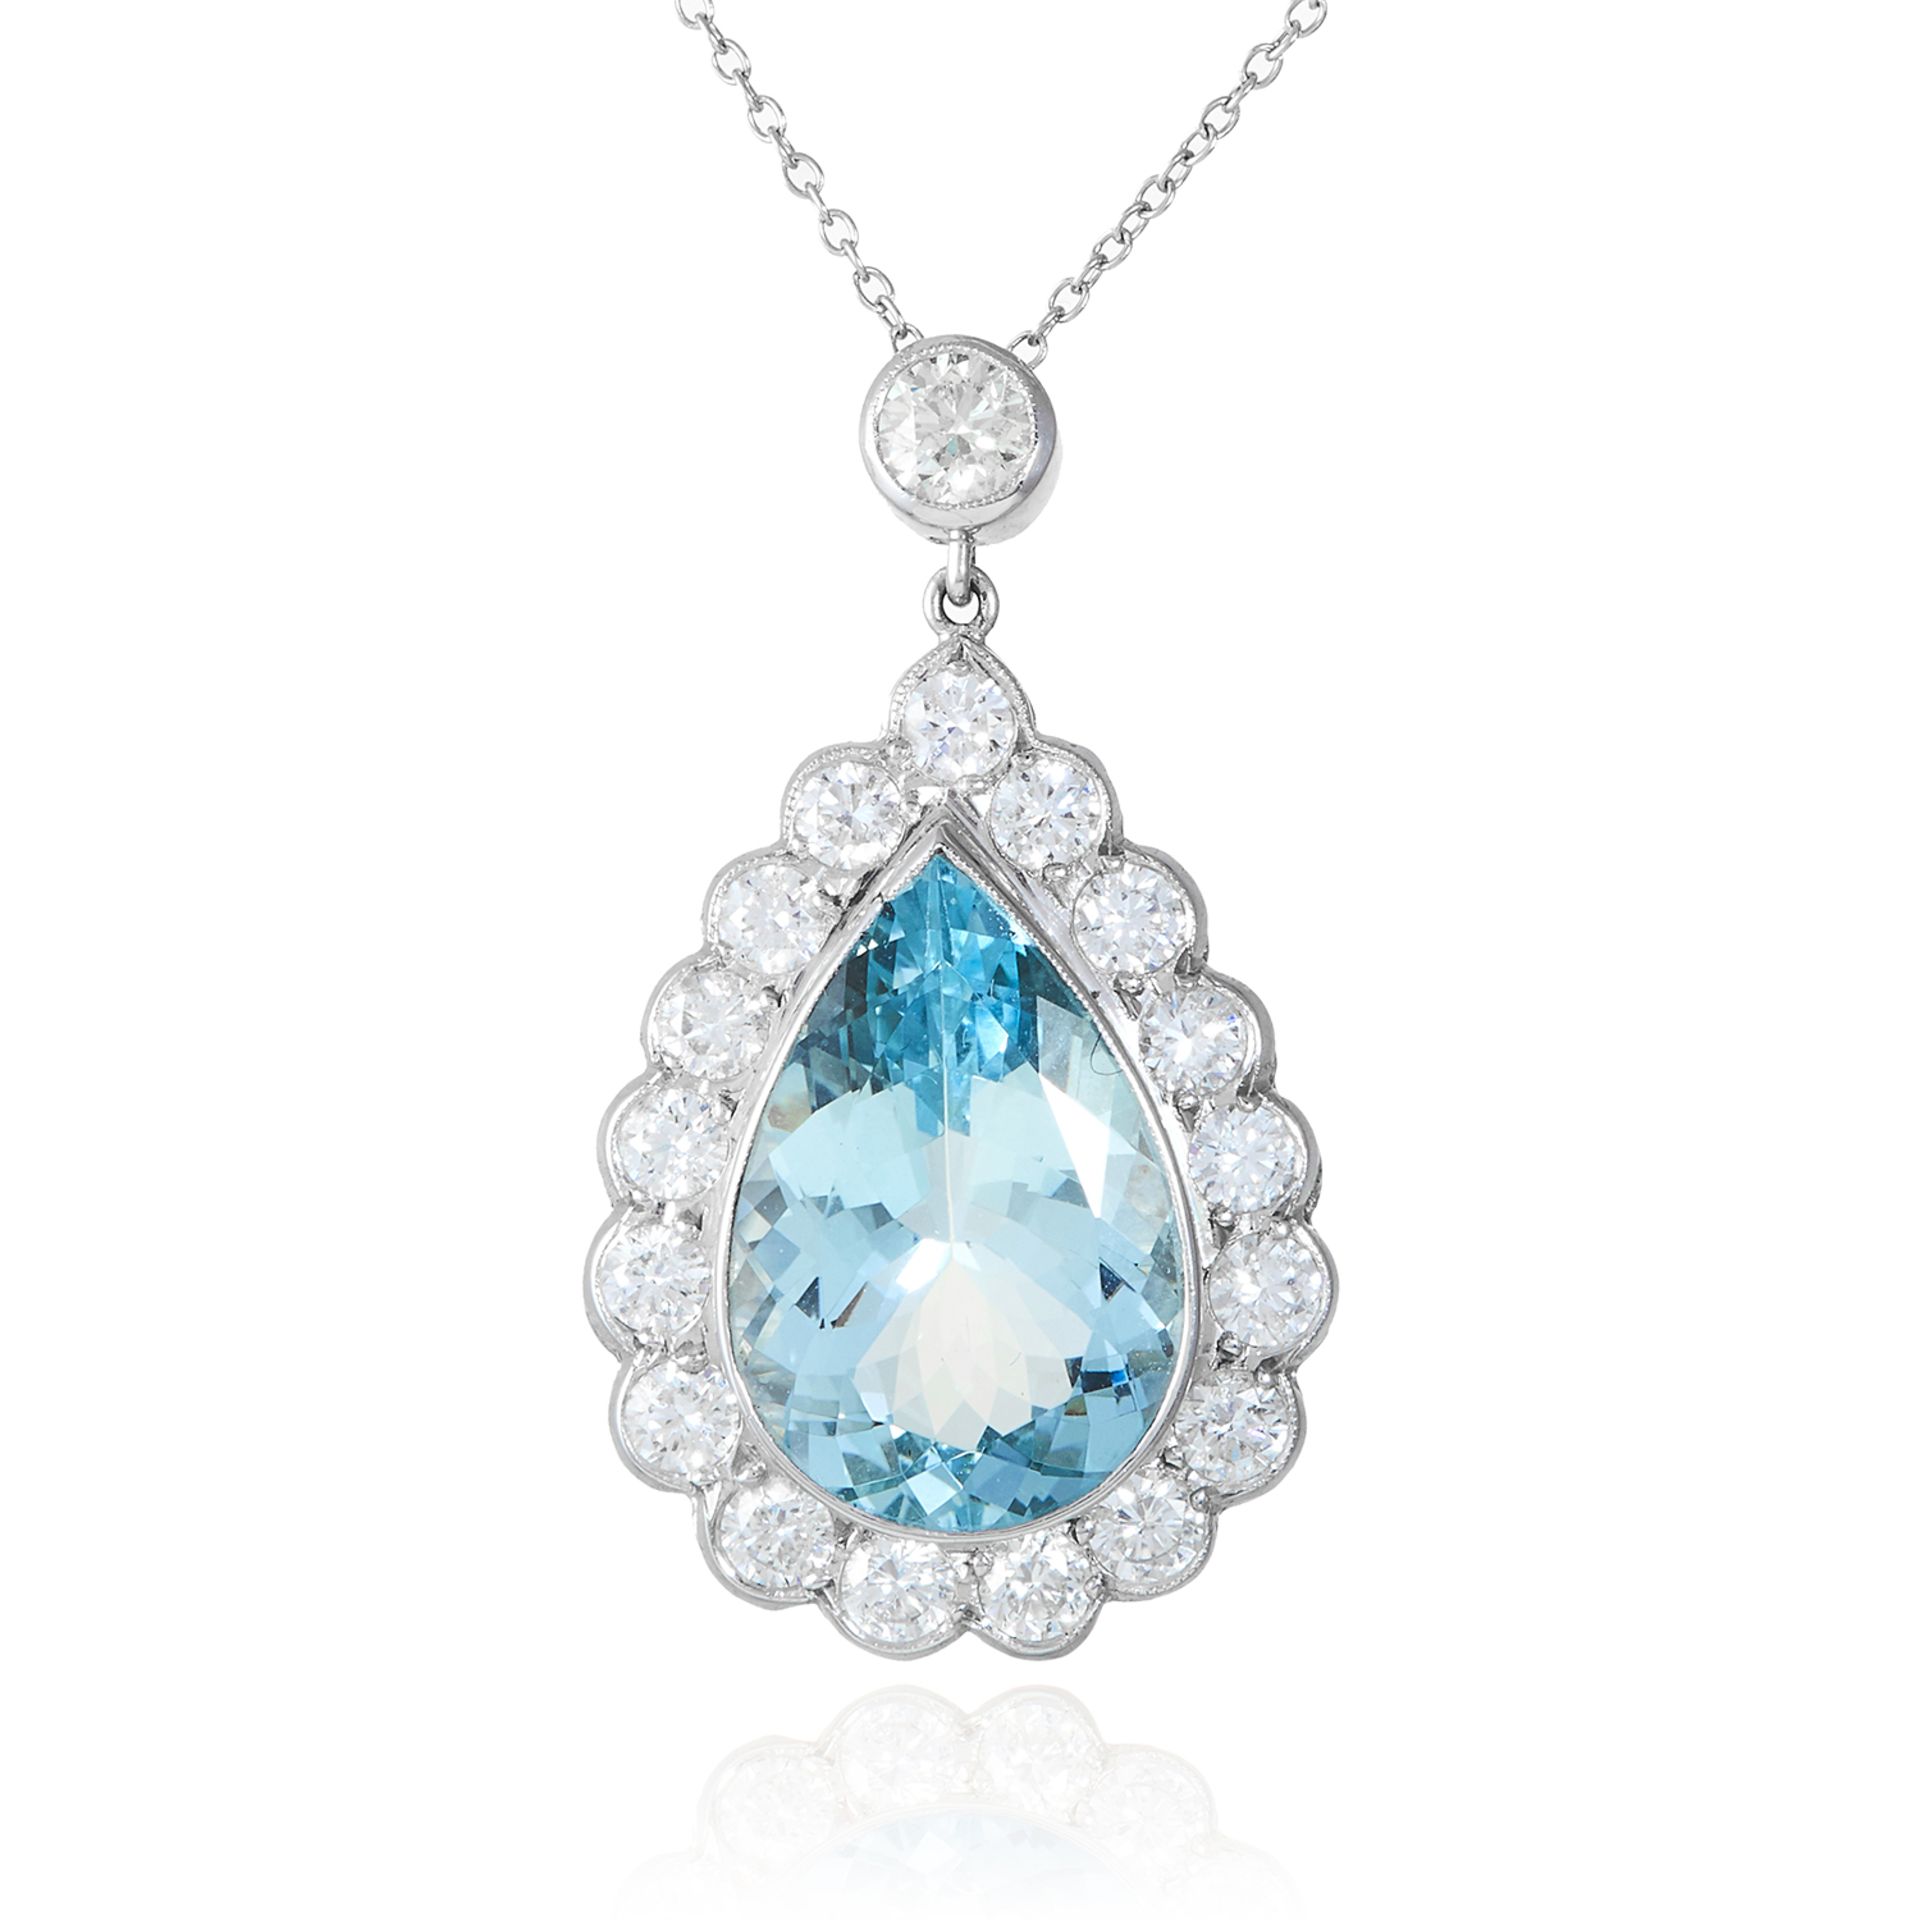 AN AQUAMARINE AND DIAMOND PENDANT in 18ct white gold, set with a pear cut aquamarine of